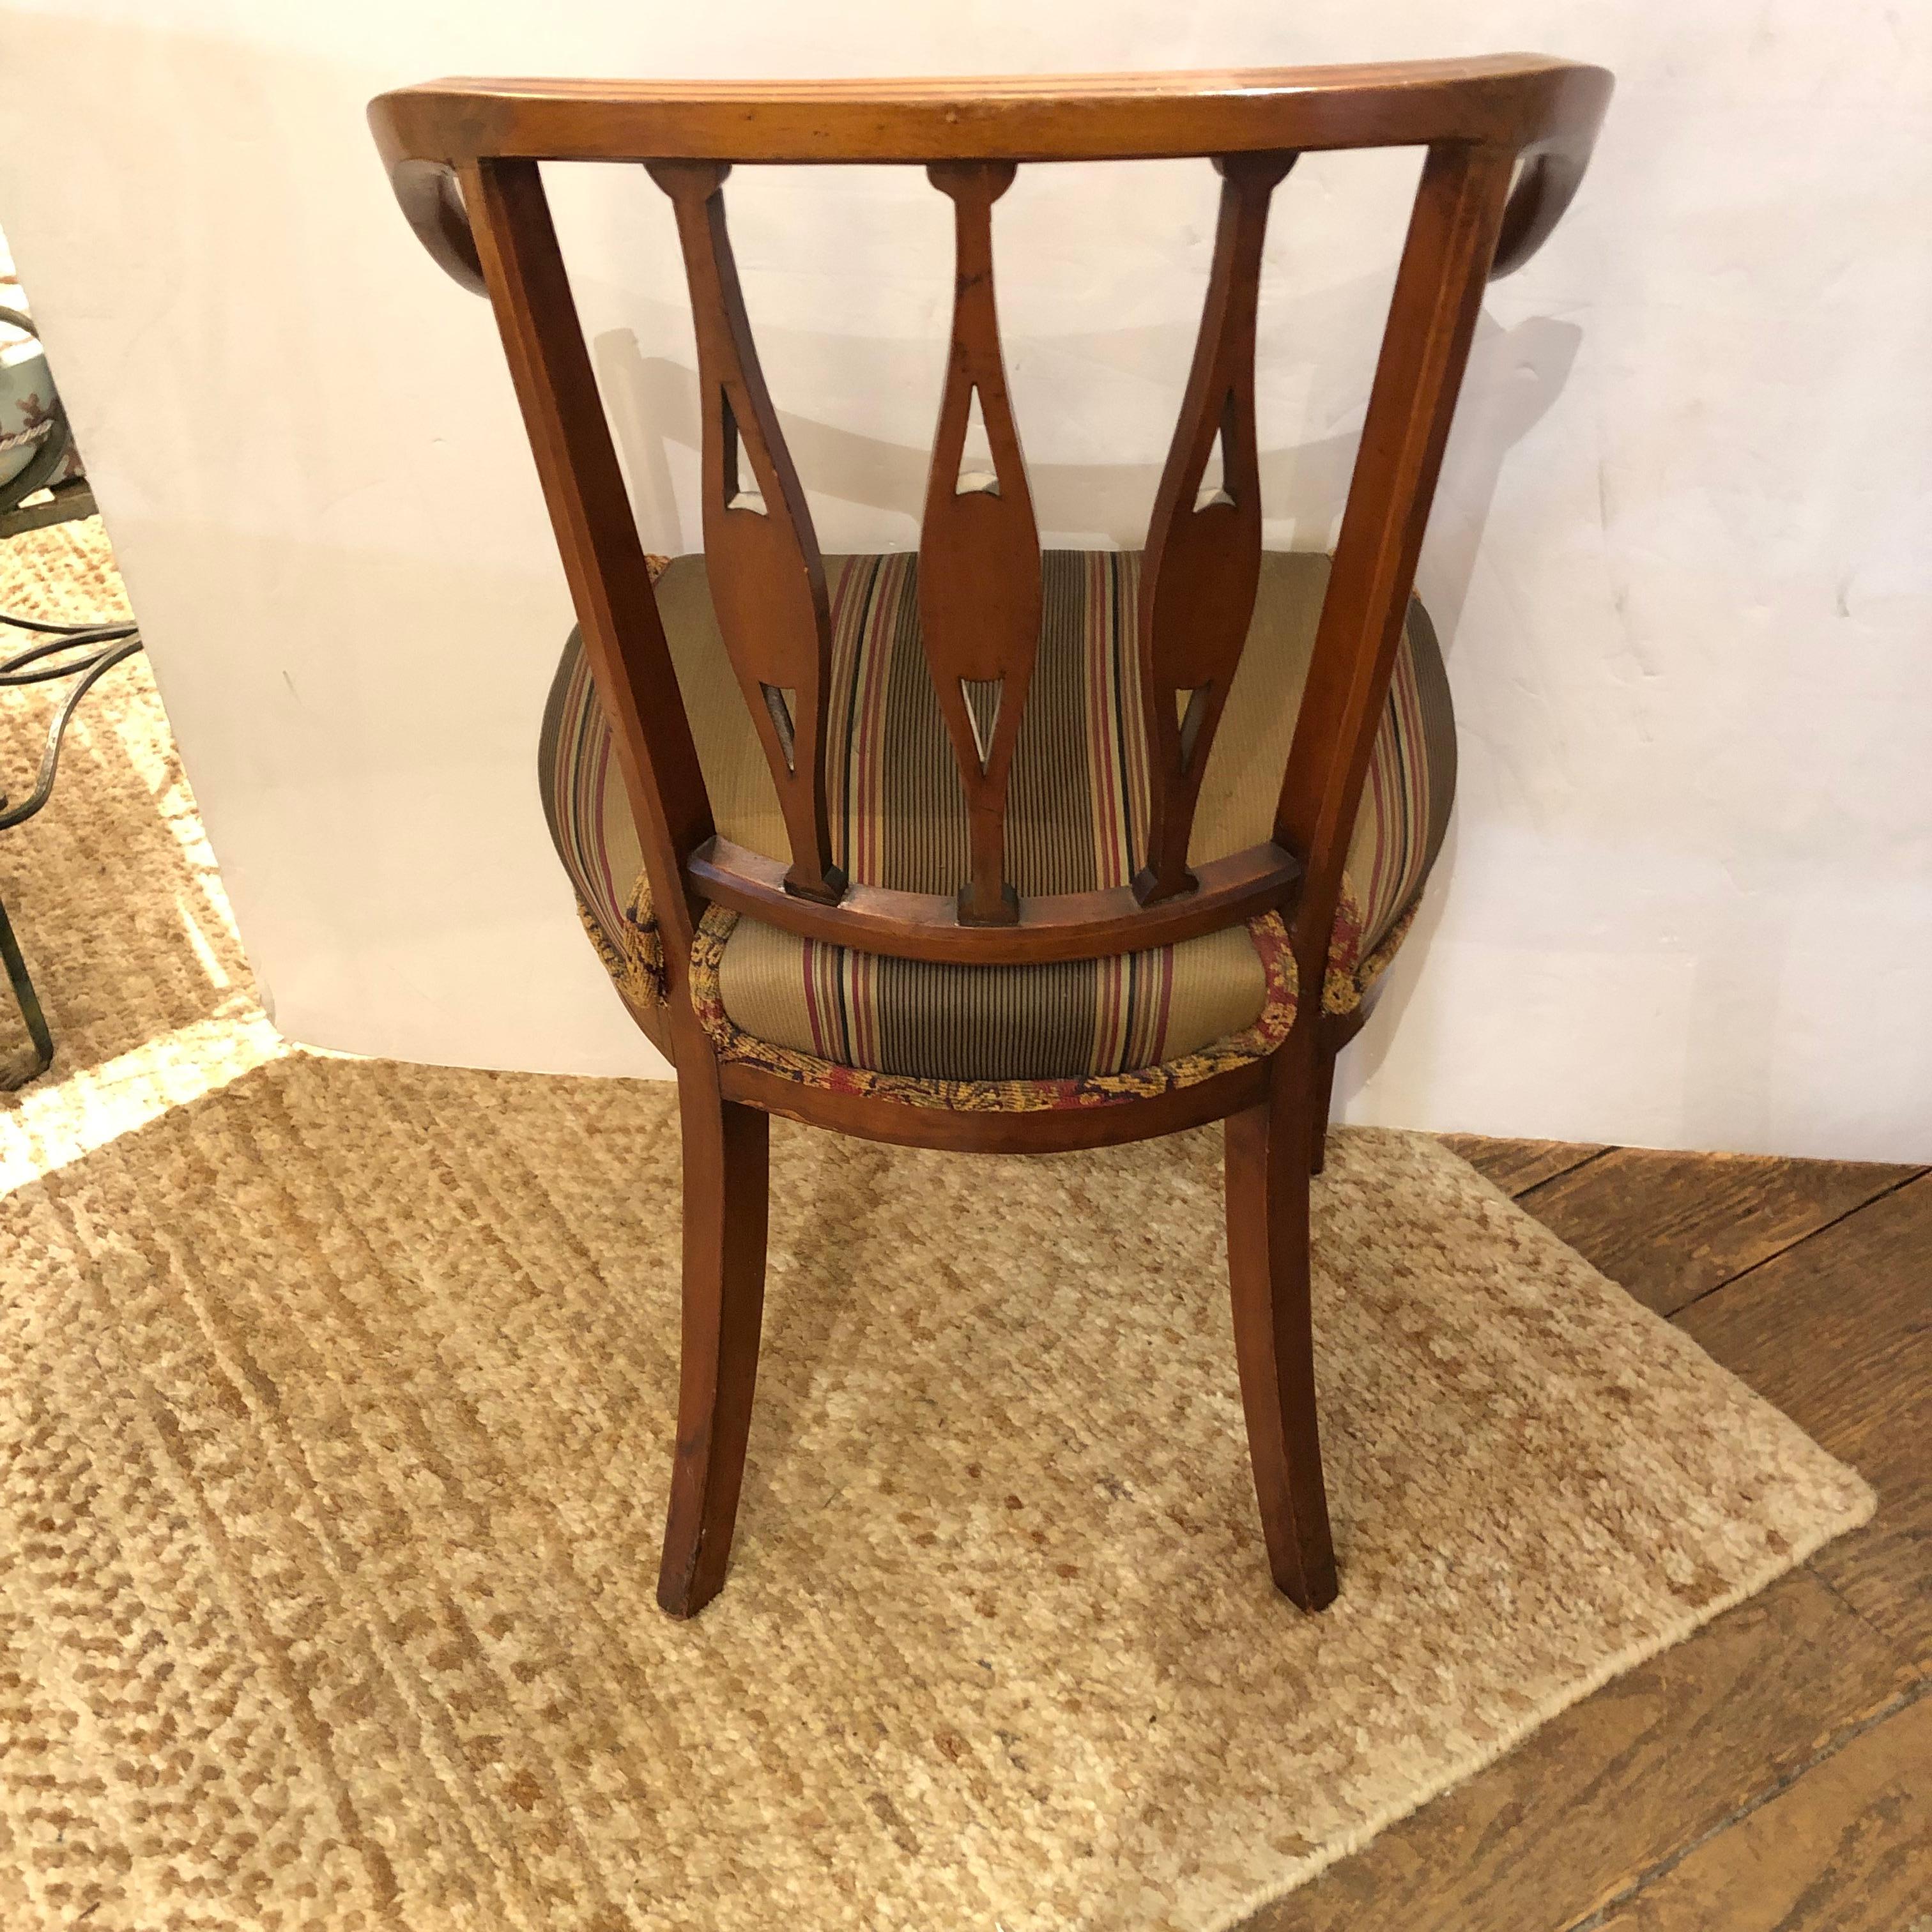 Lovely Curved French Fruitwood Inlaid Salon or Desk Chair For Sale 2